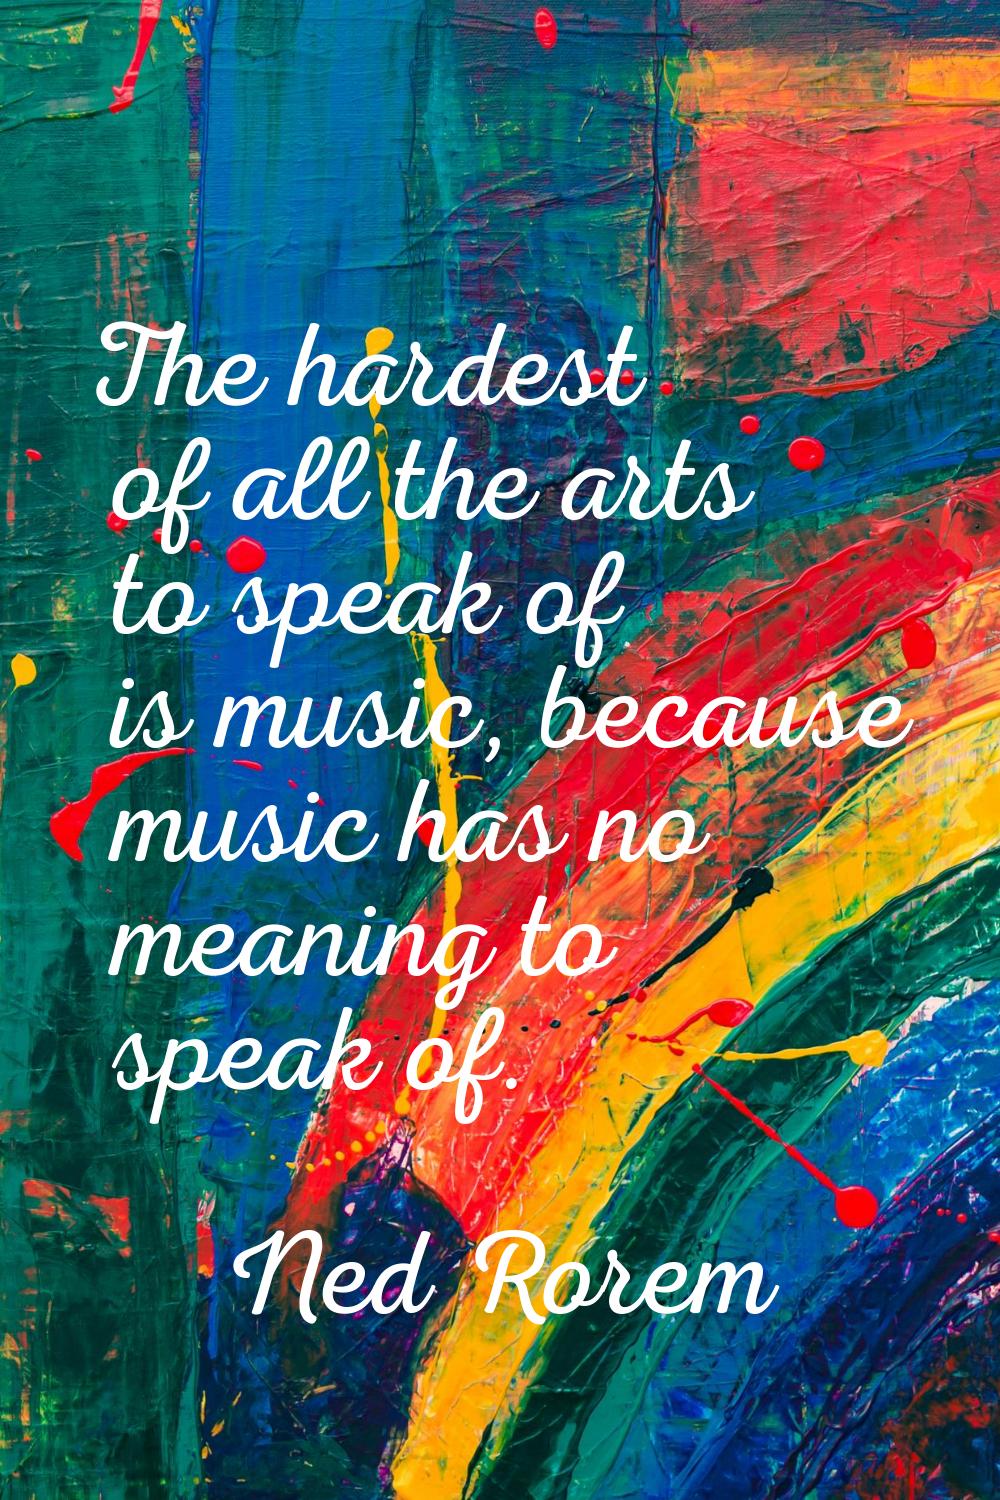 The hardest of all the arts to speak of is music, because music has no meaning to speak of.